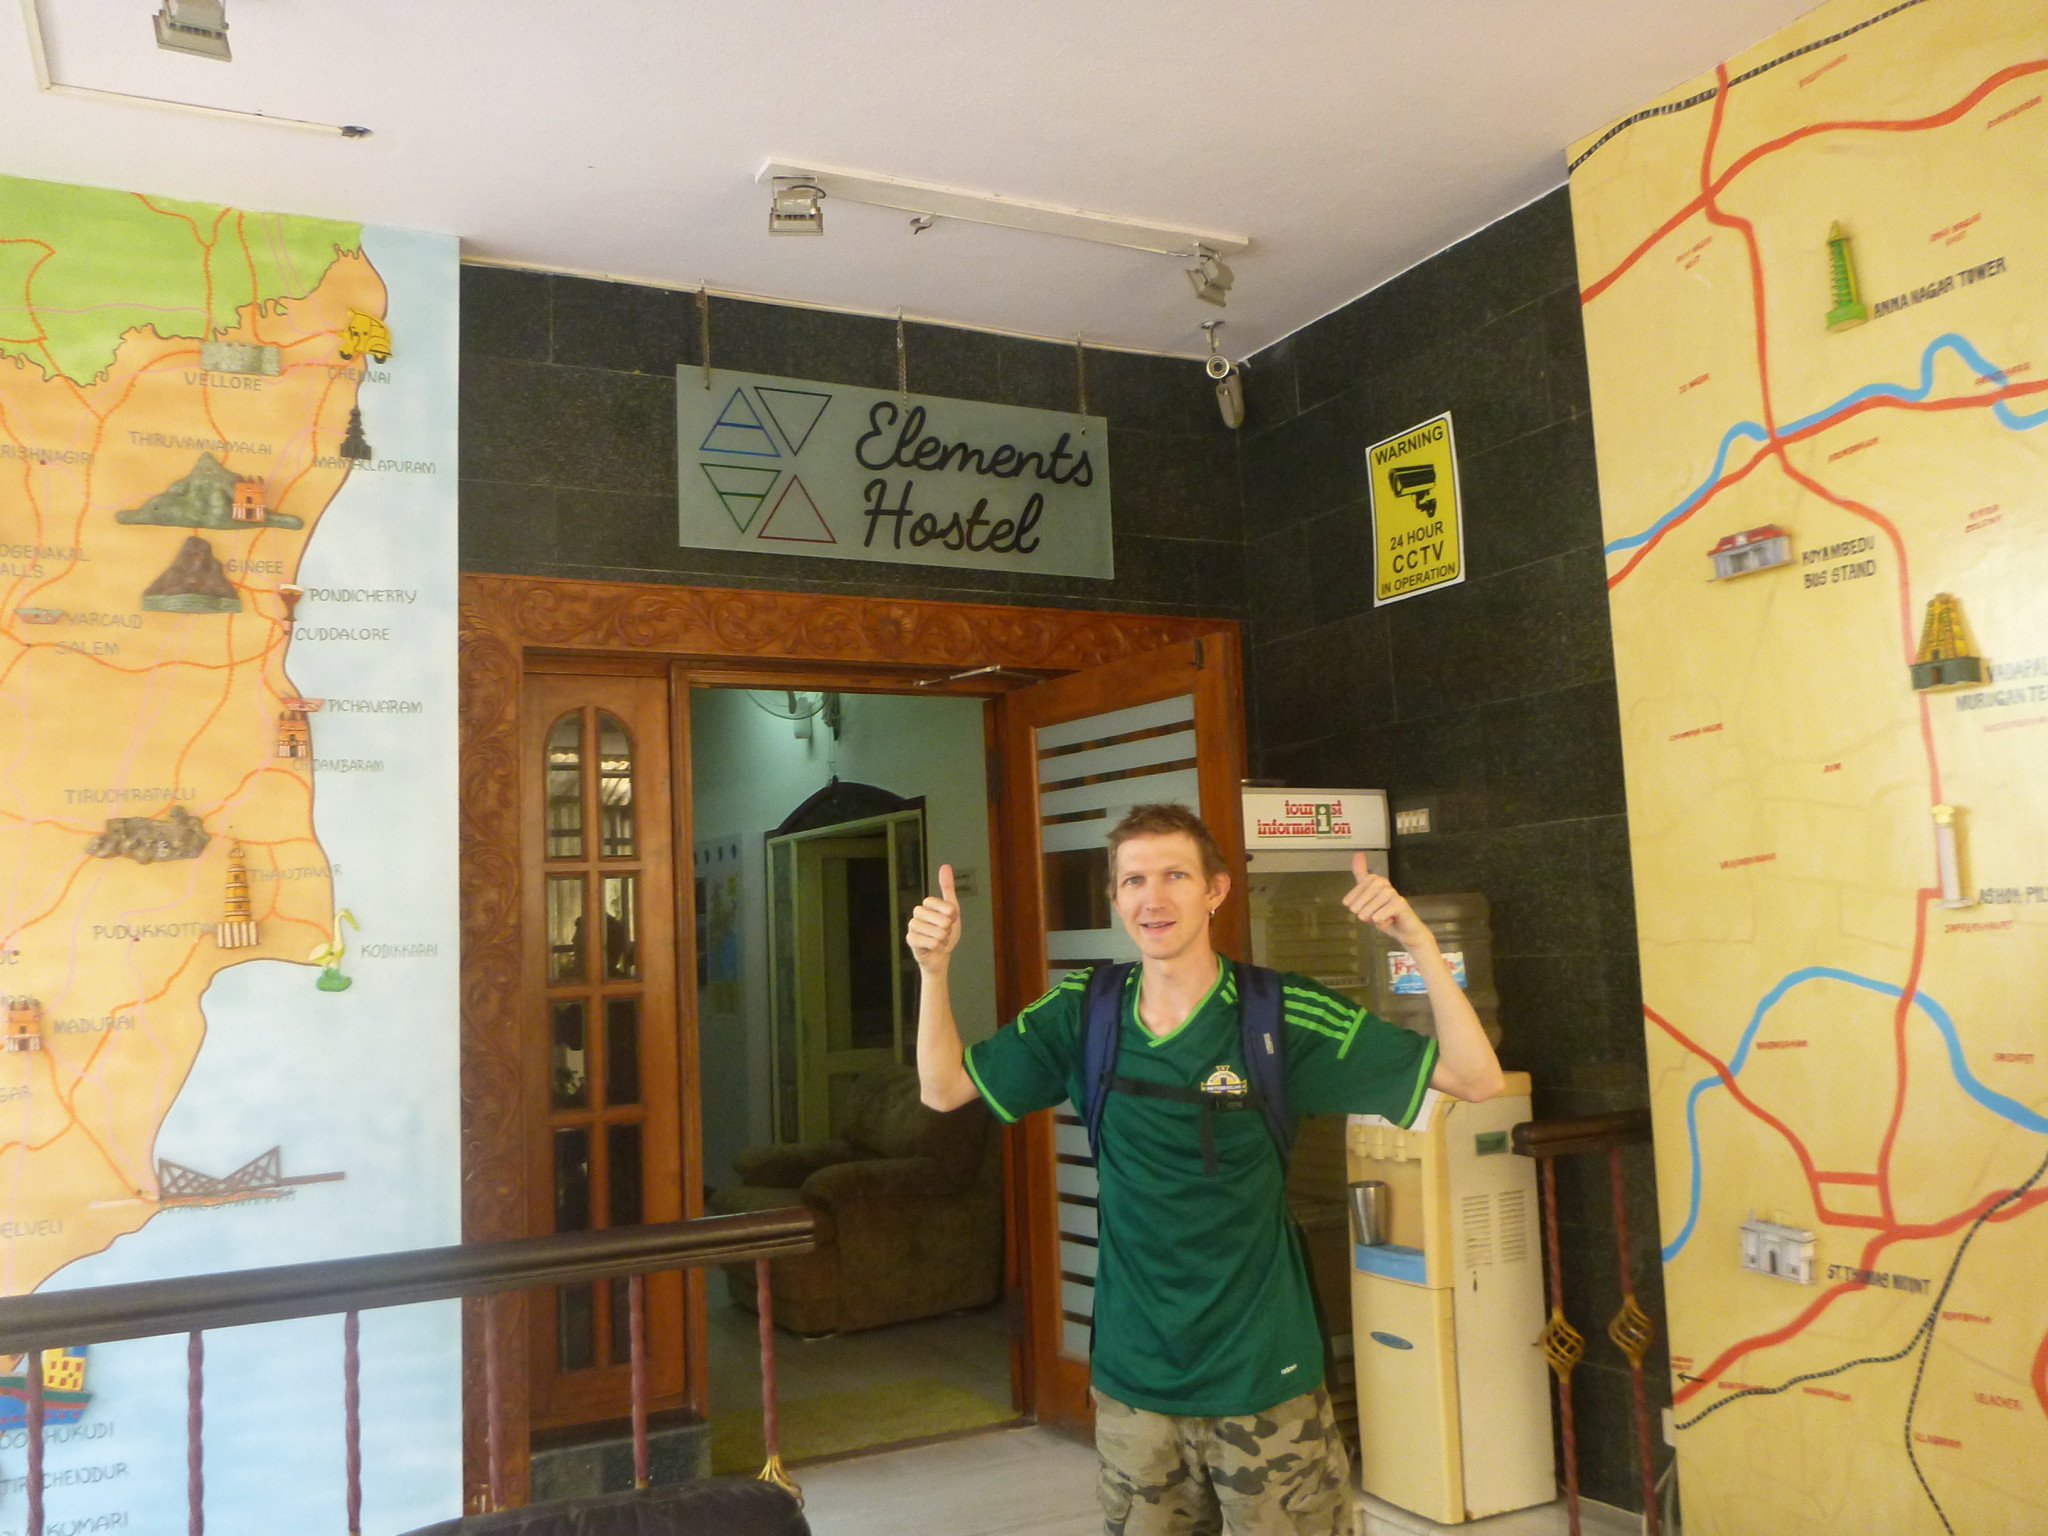 My Stay at Elements Hostel: The Best Backpacker Hostel in Chennai, India